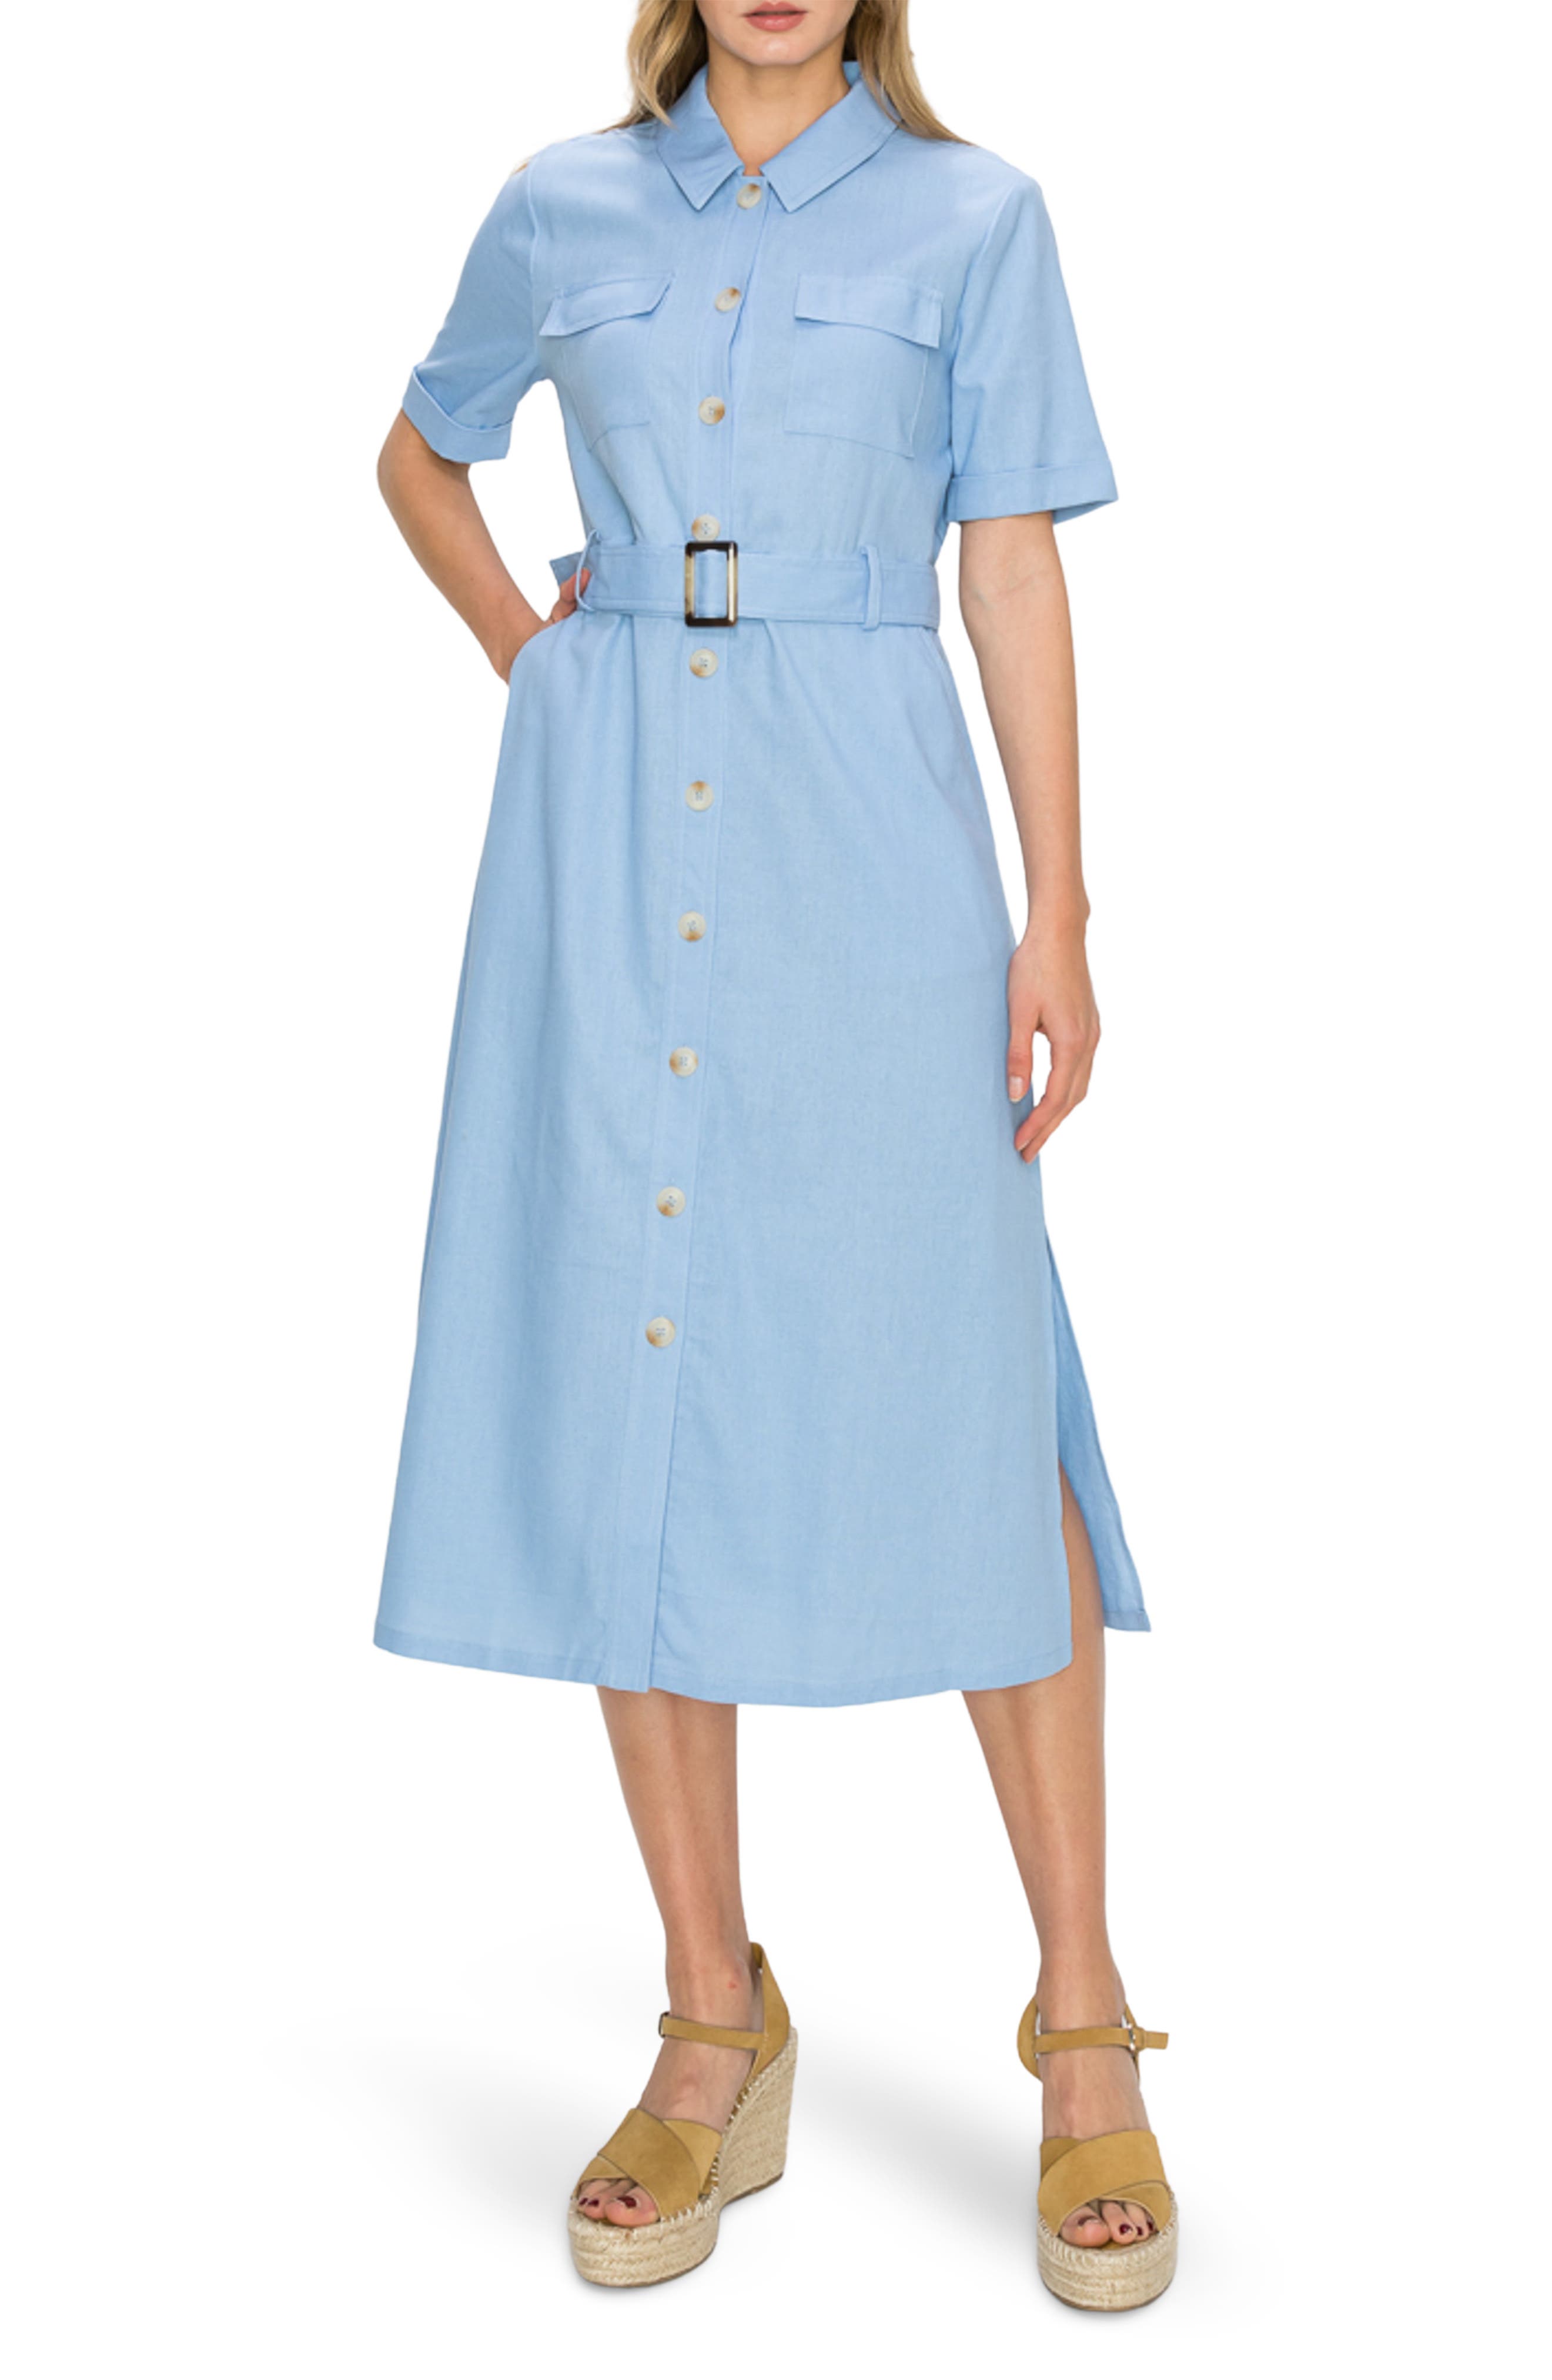 Fifties Dresses: 1950s Style Swing to Wiggle Dresses MELLODAY Short Sleeve Linen Blend Midi Shirtdress in Blue at Nordstrom Rack Size X-Small $39.97 AT vintagedancer.com